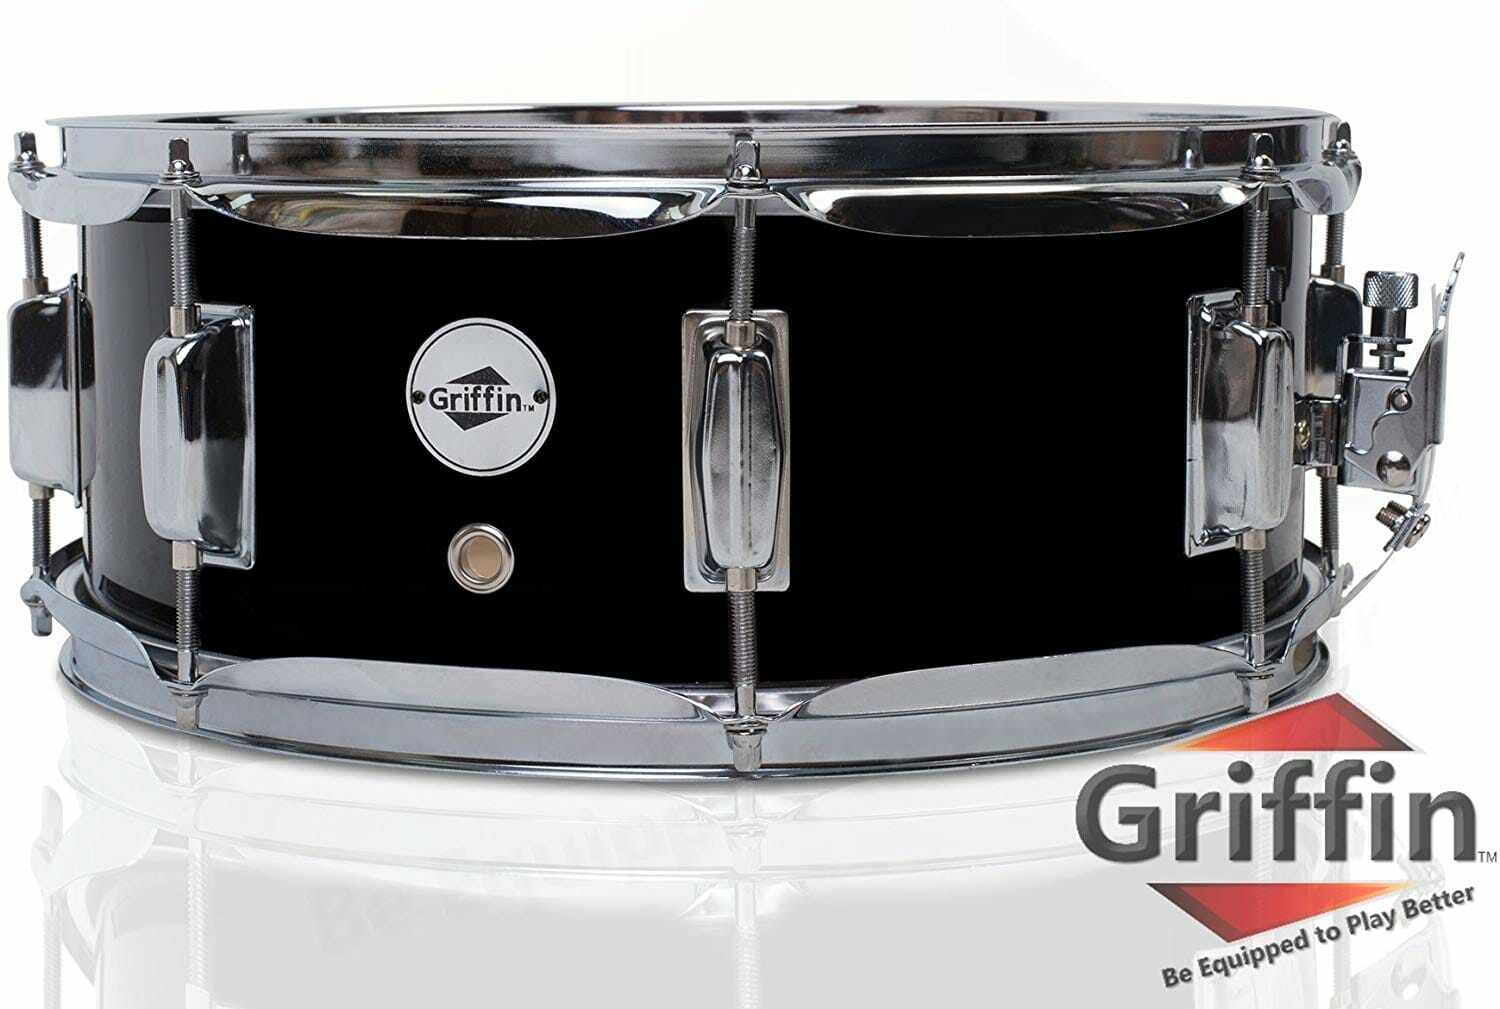 Griffin’s Wood Shell Snare Drum Review - Loud Beats